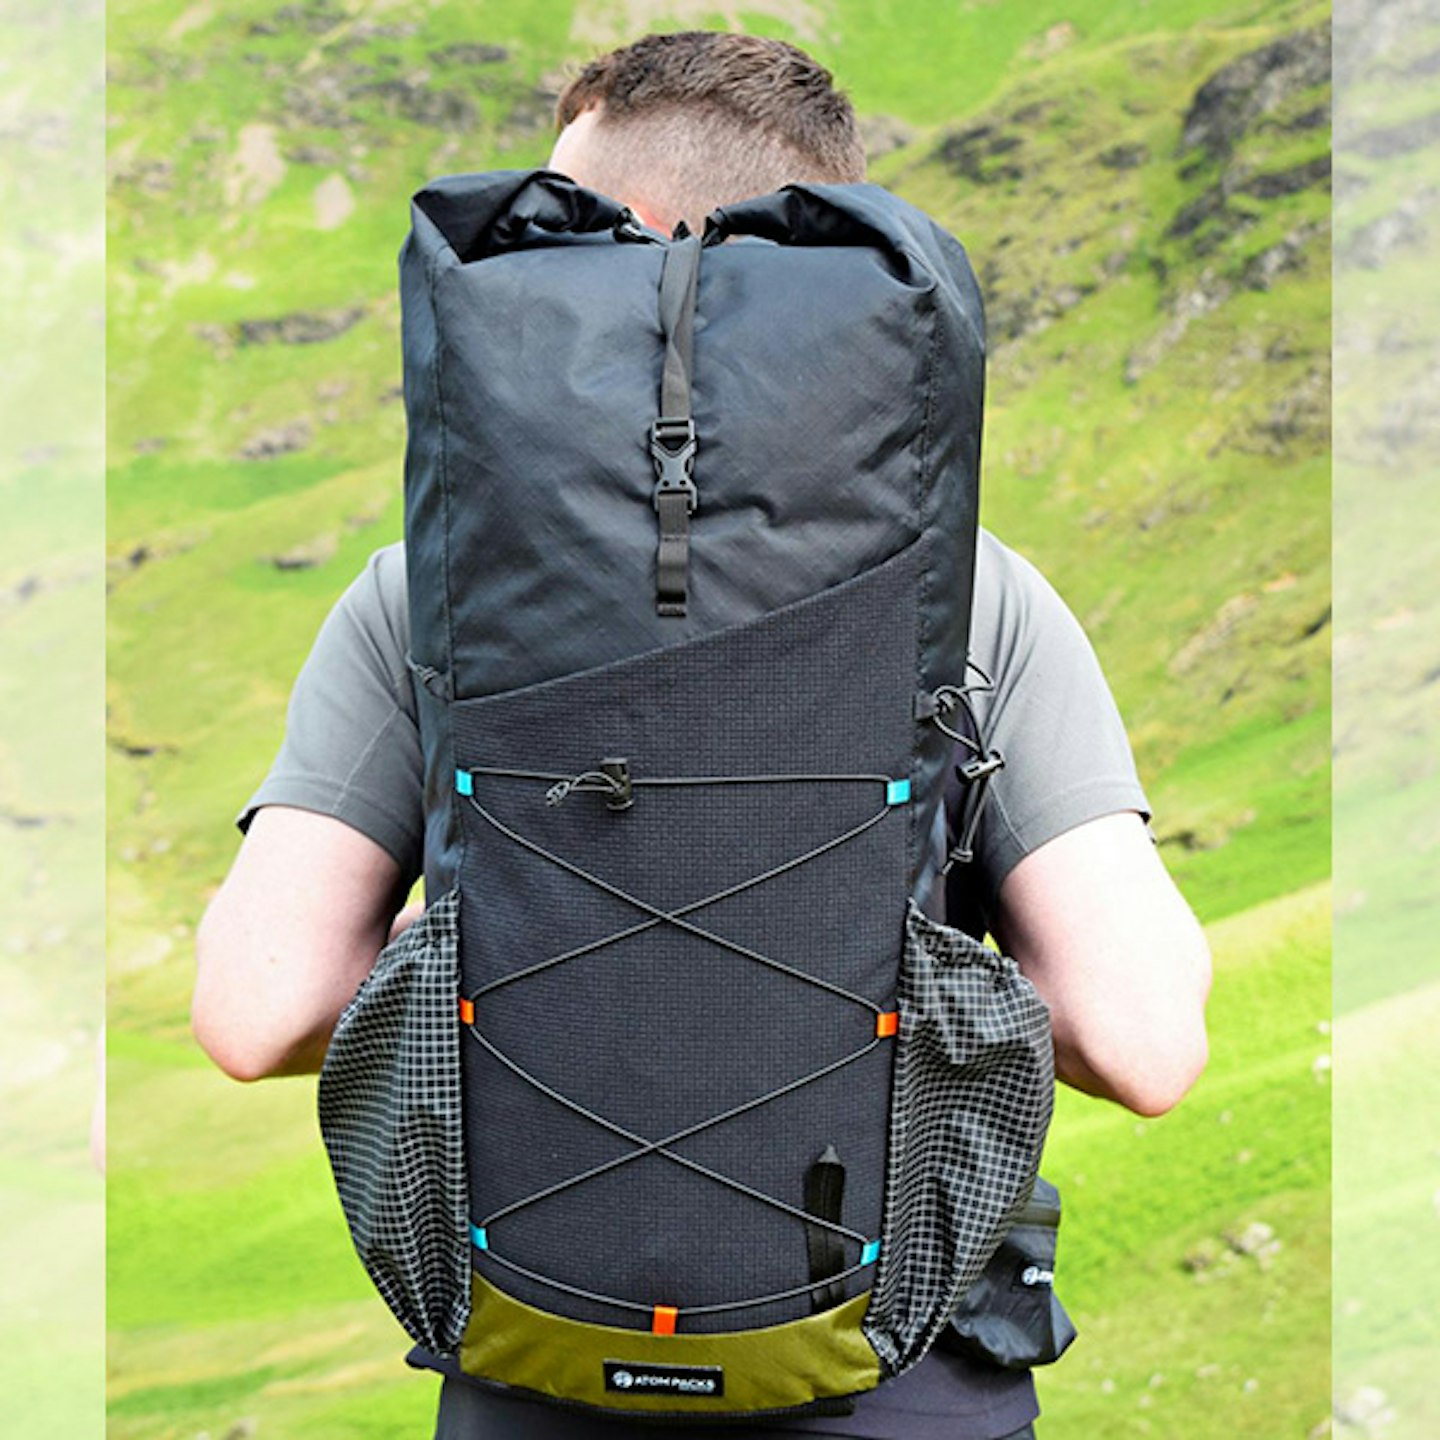 Atom Packs best hiking backpack LFTO gear of the year